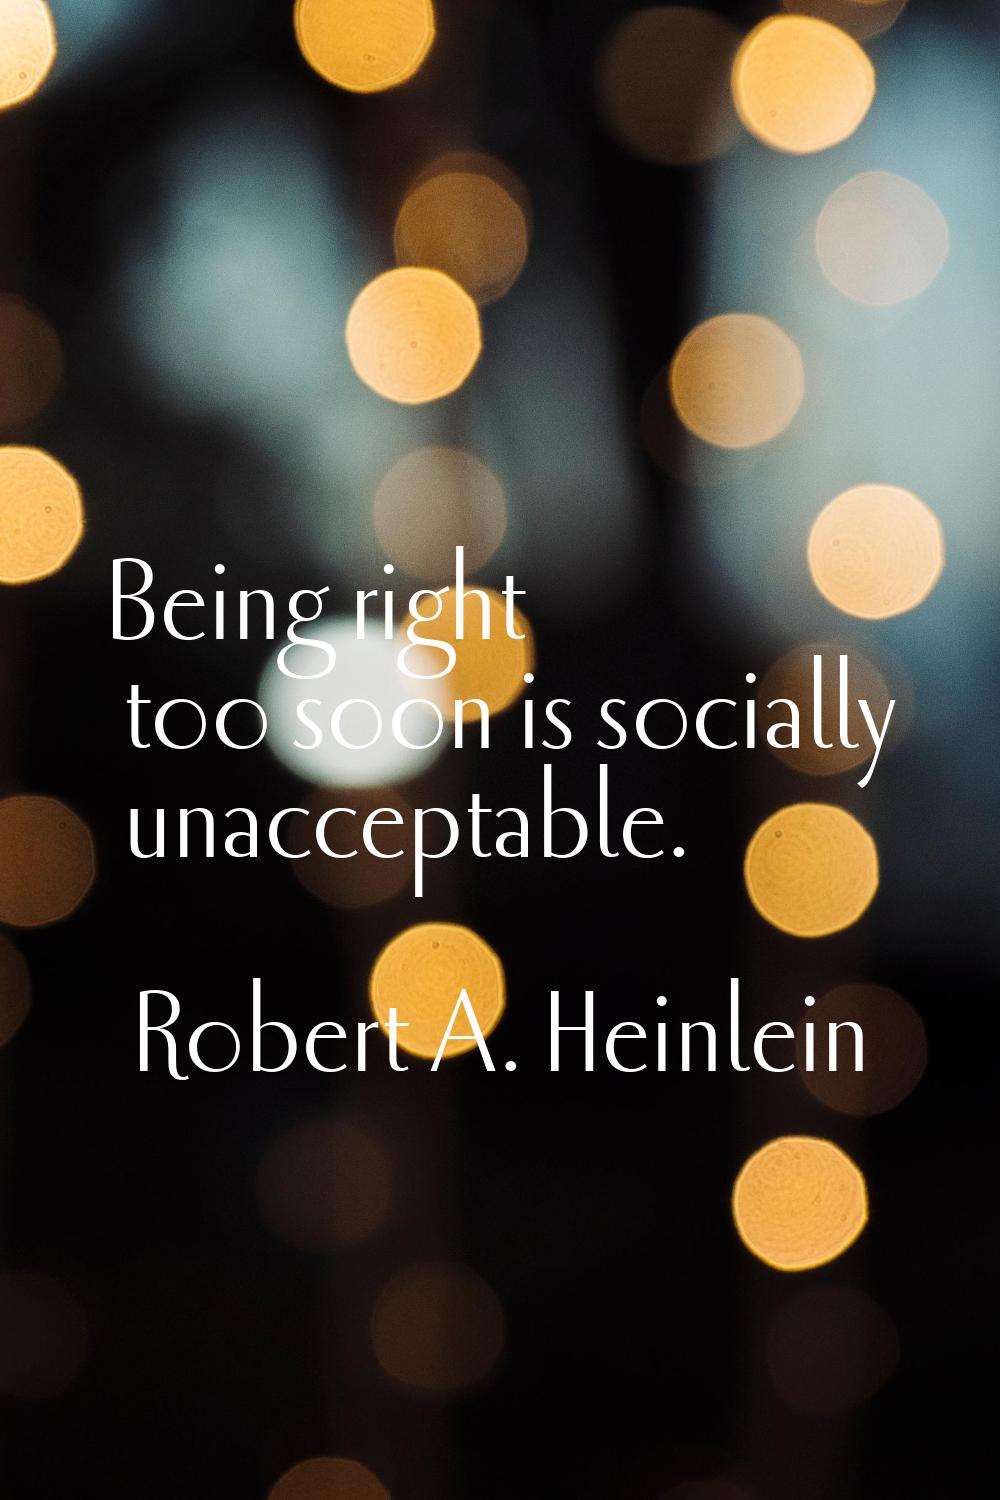 Being right too soon is socially unacceptable.